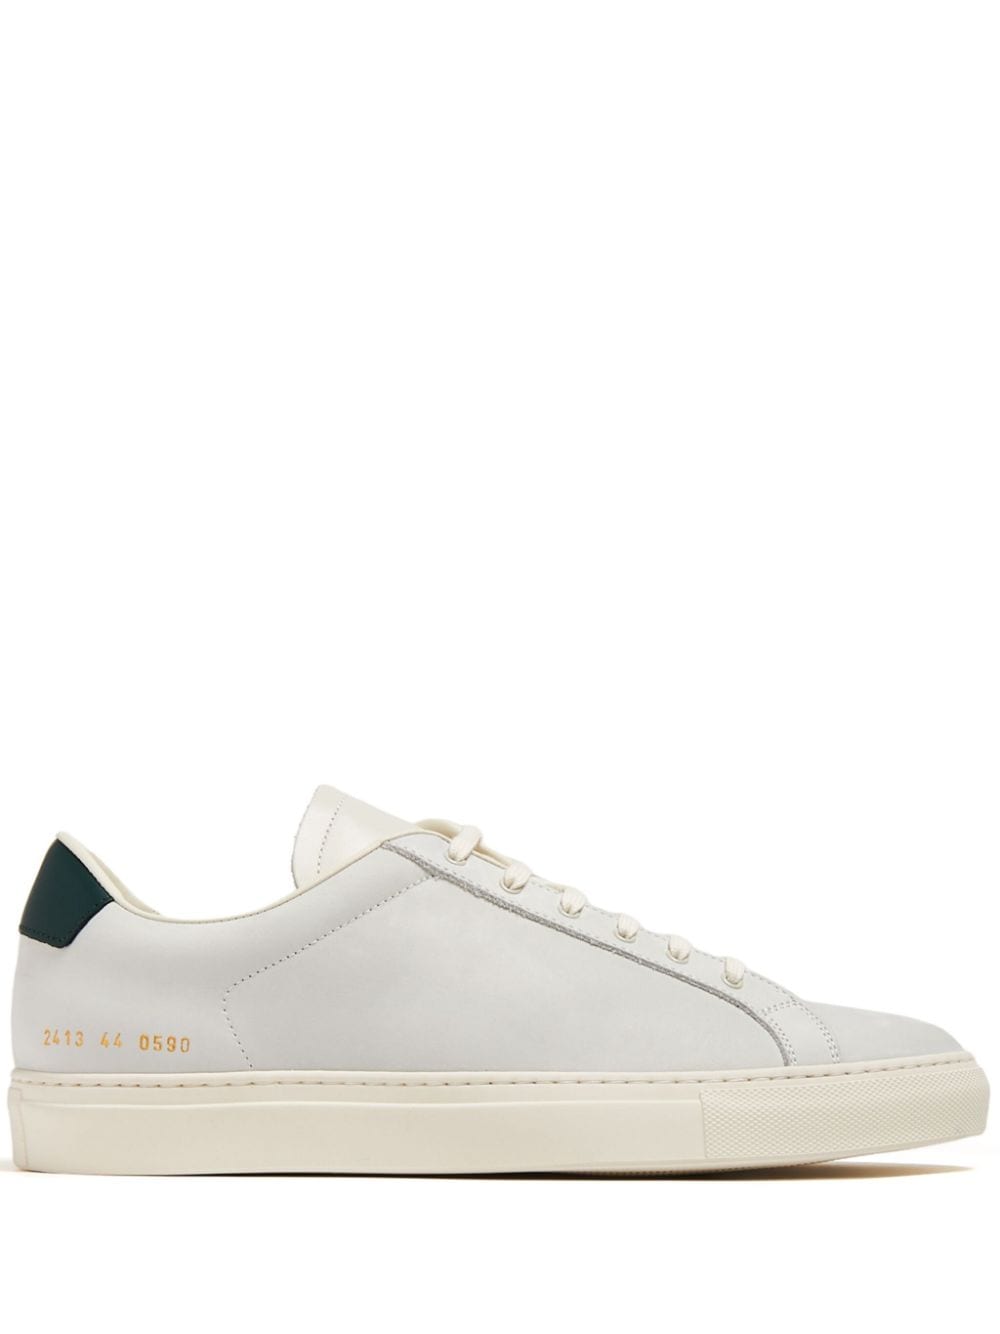 Common Projects Achilles lace-up sneakers - White von Common Projects